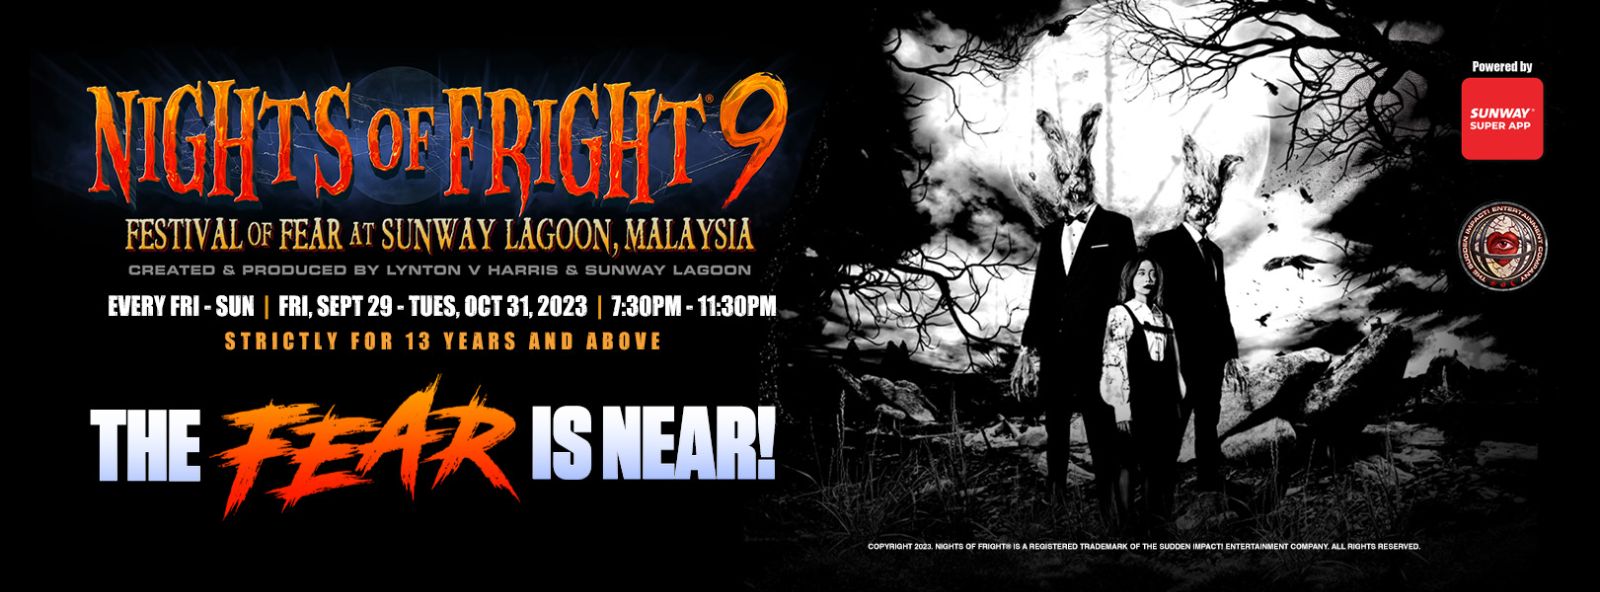 Join us at #NightsOfFright9 for some spooktacular Halloween fun at Sunway Lagoon! 👻